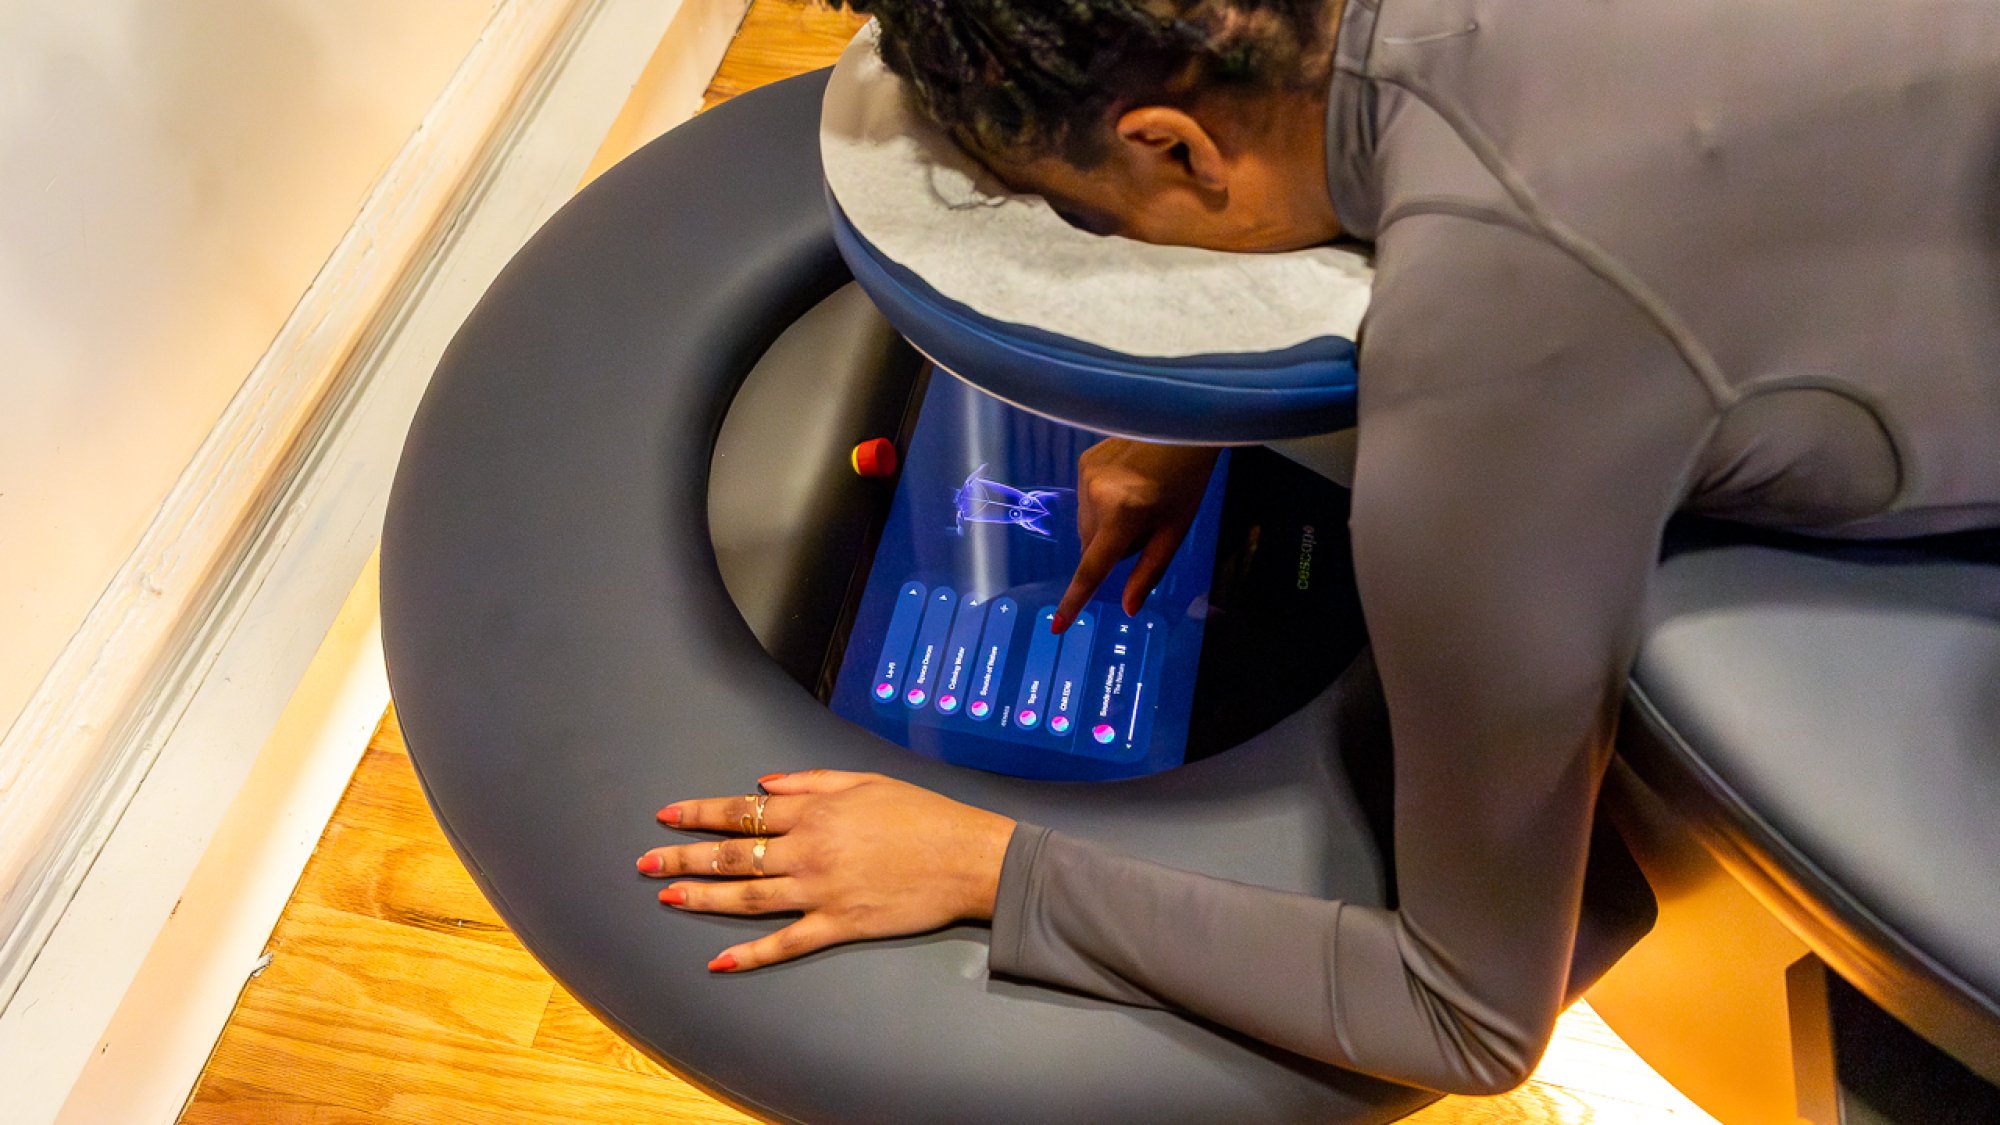 Kimberly Gedeon trying out Aescape's robot massage